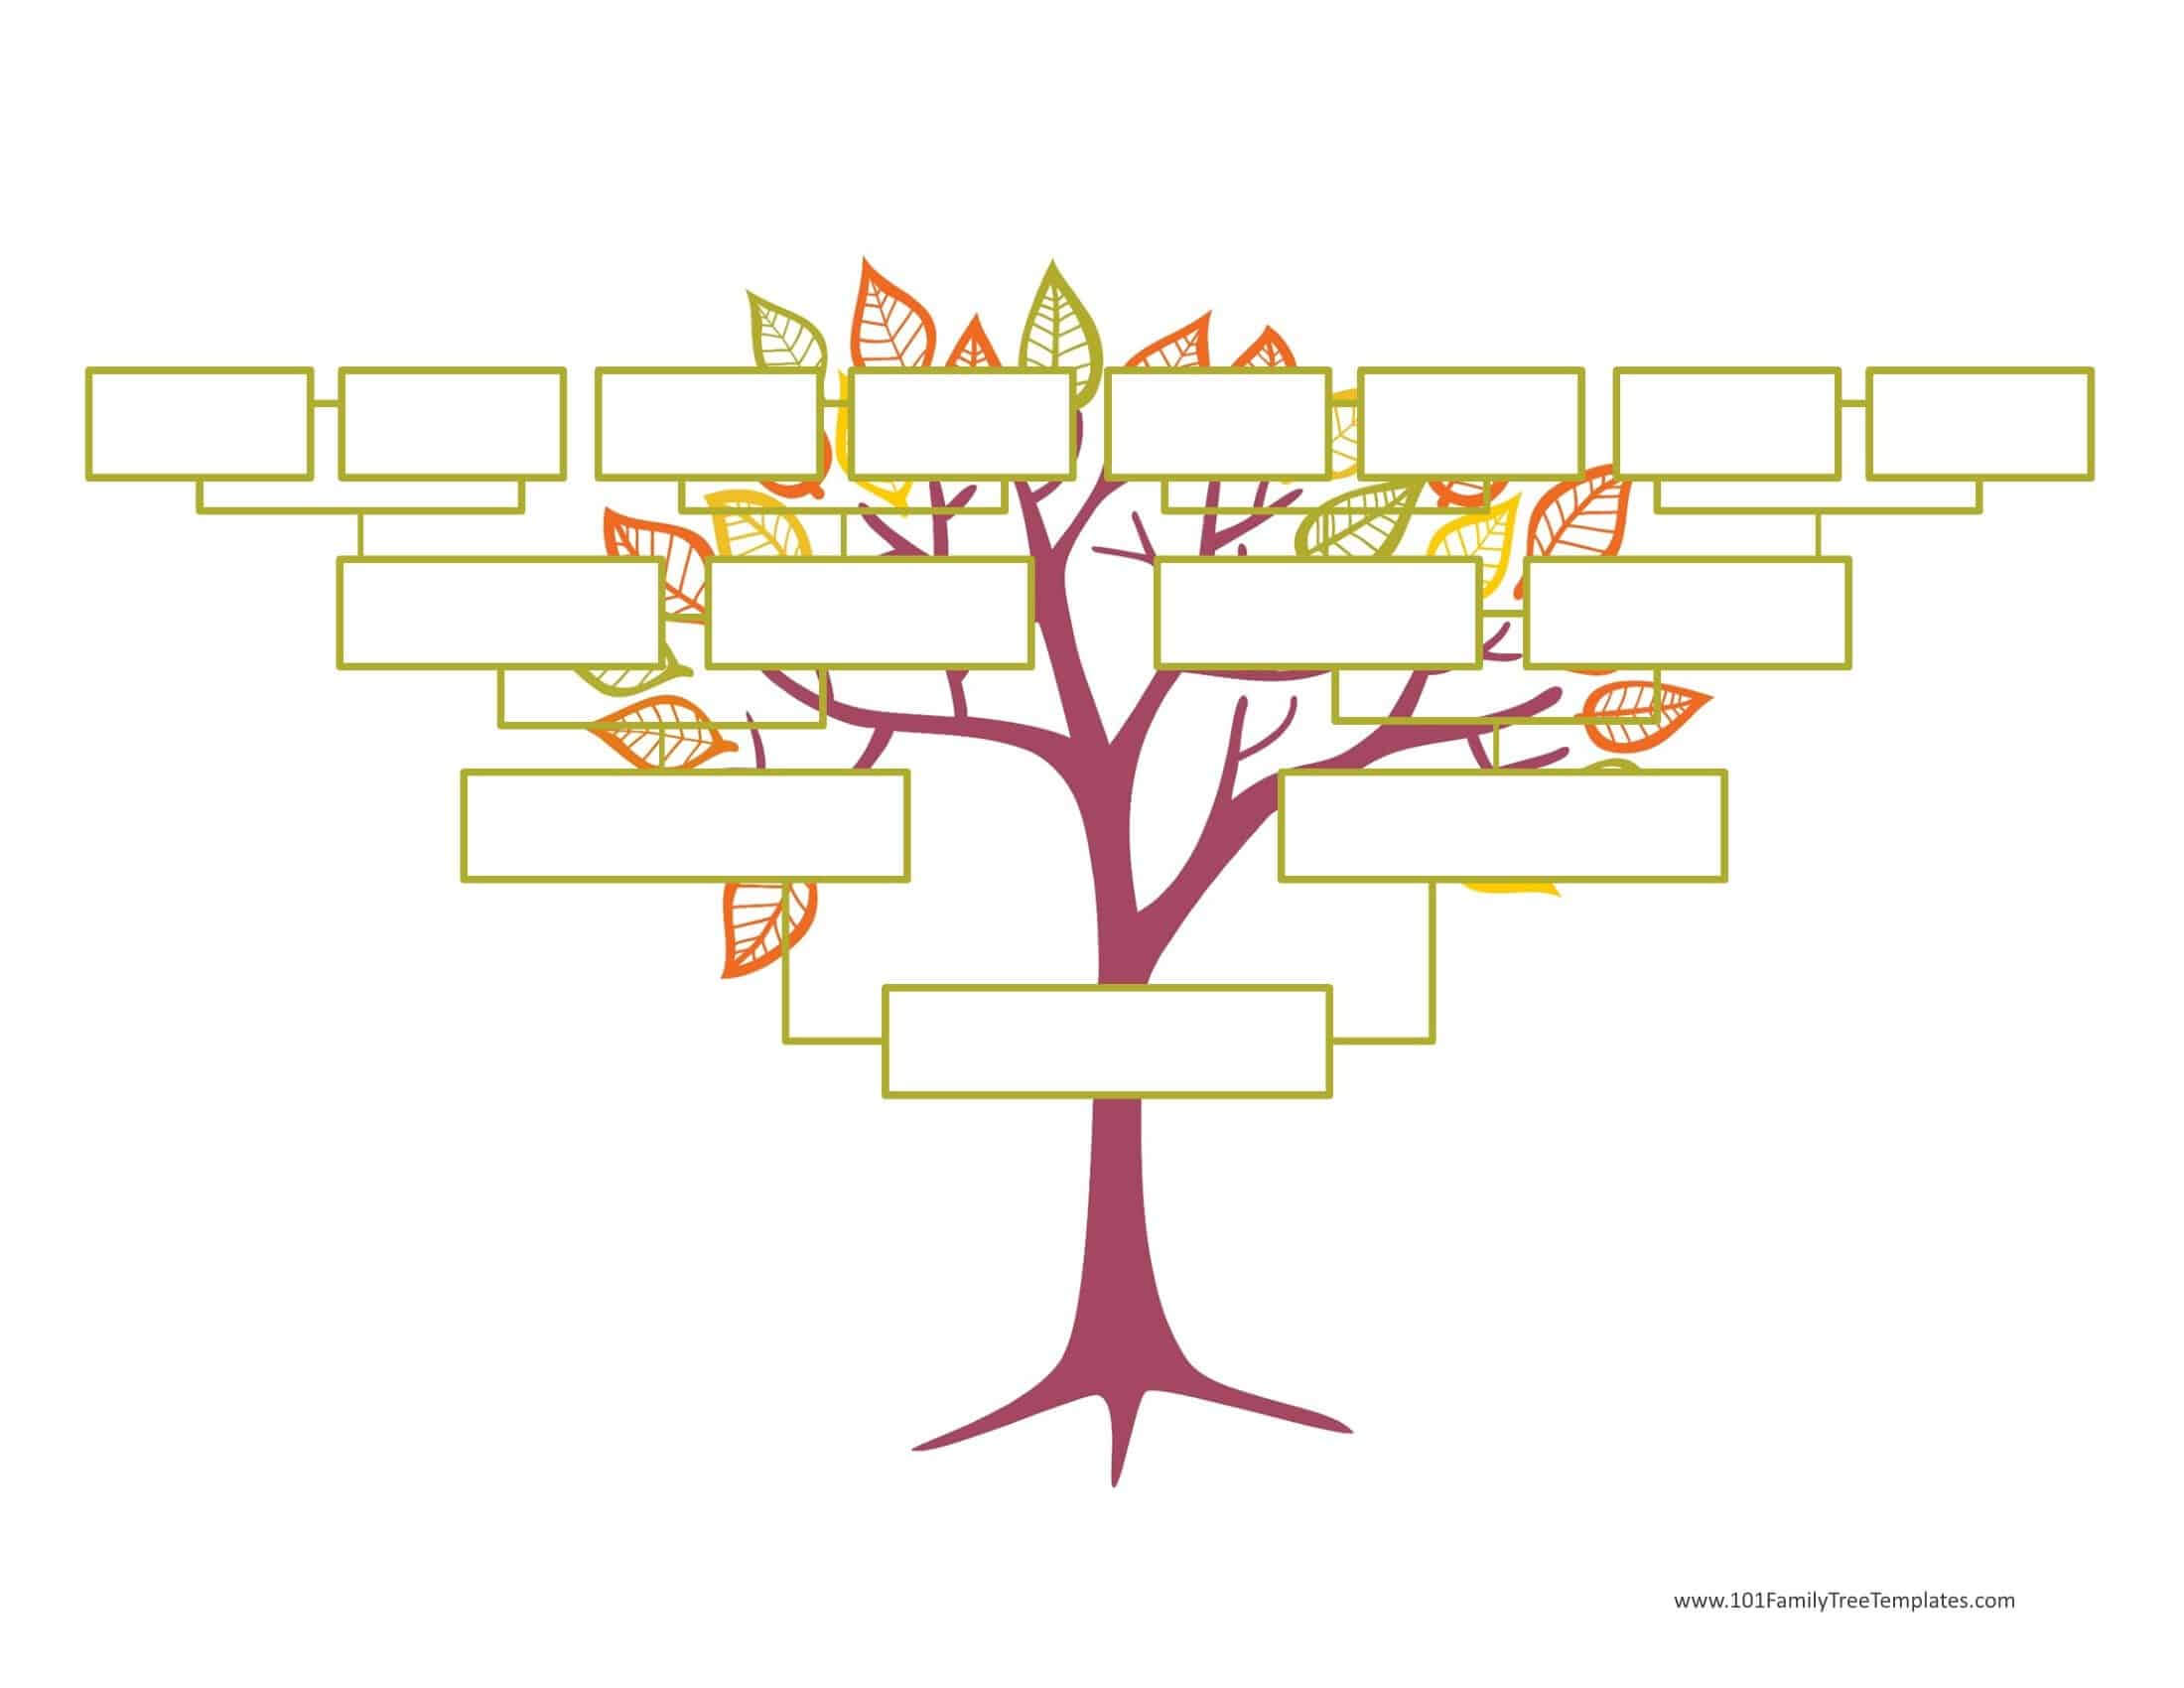 Blank Family Tree Template | Free Instant Download For Blank Tree Diagram Template